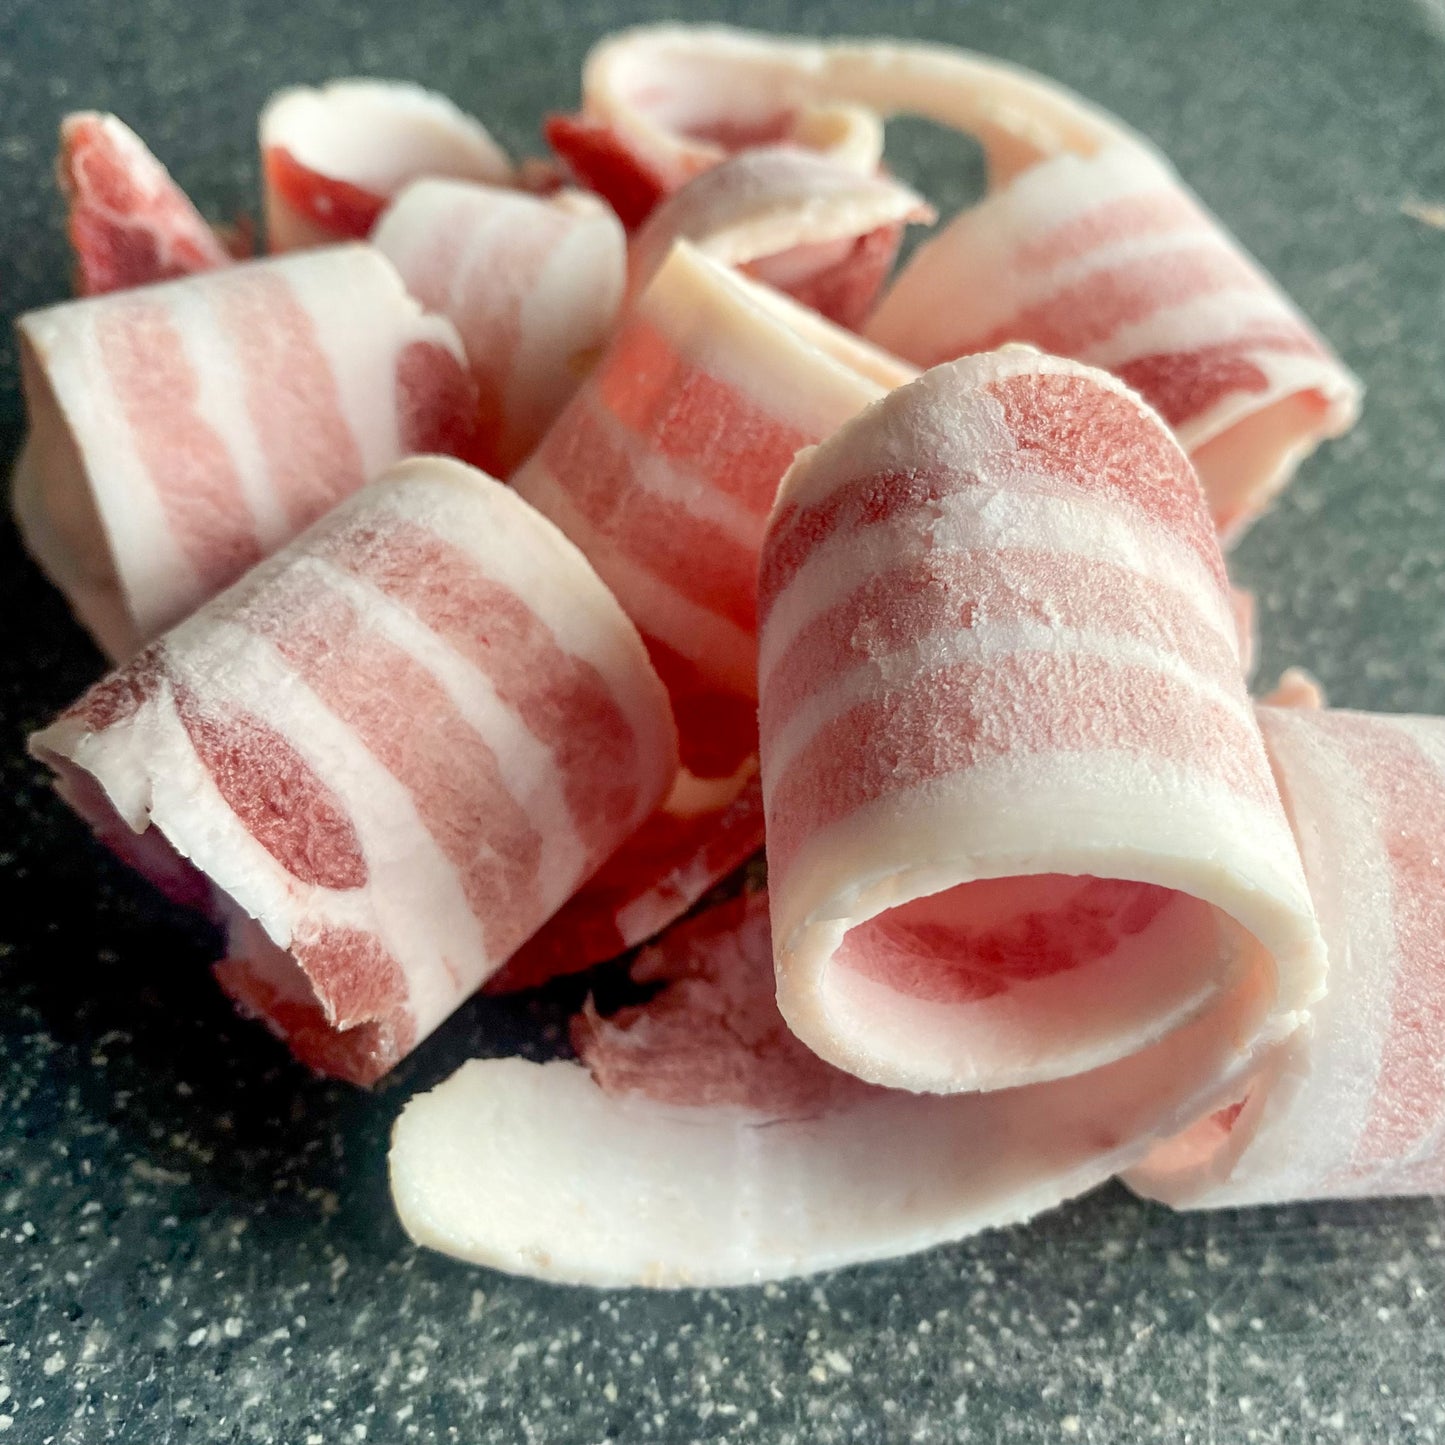 Wholesale Belly Bacon